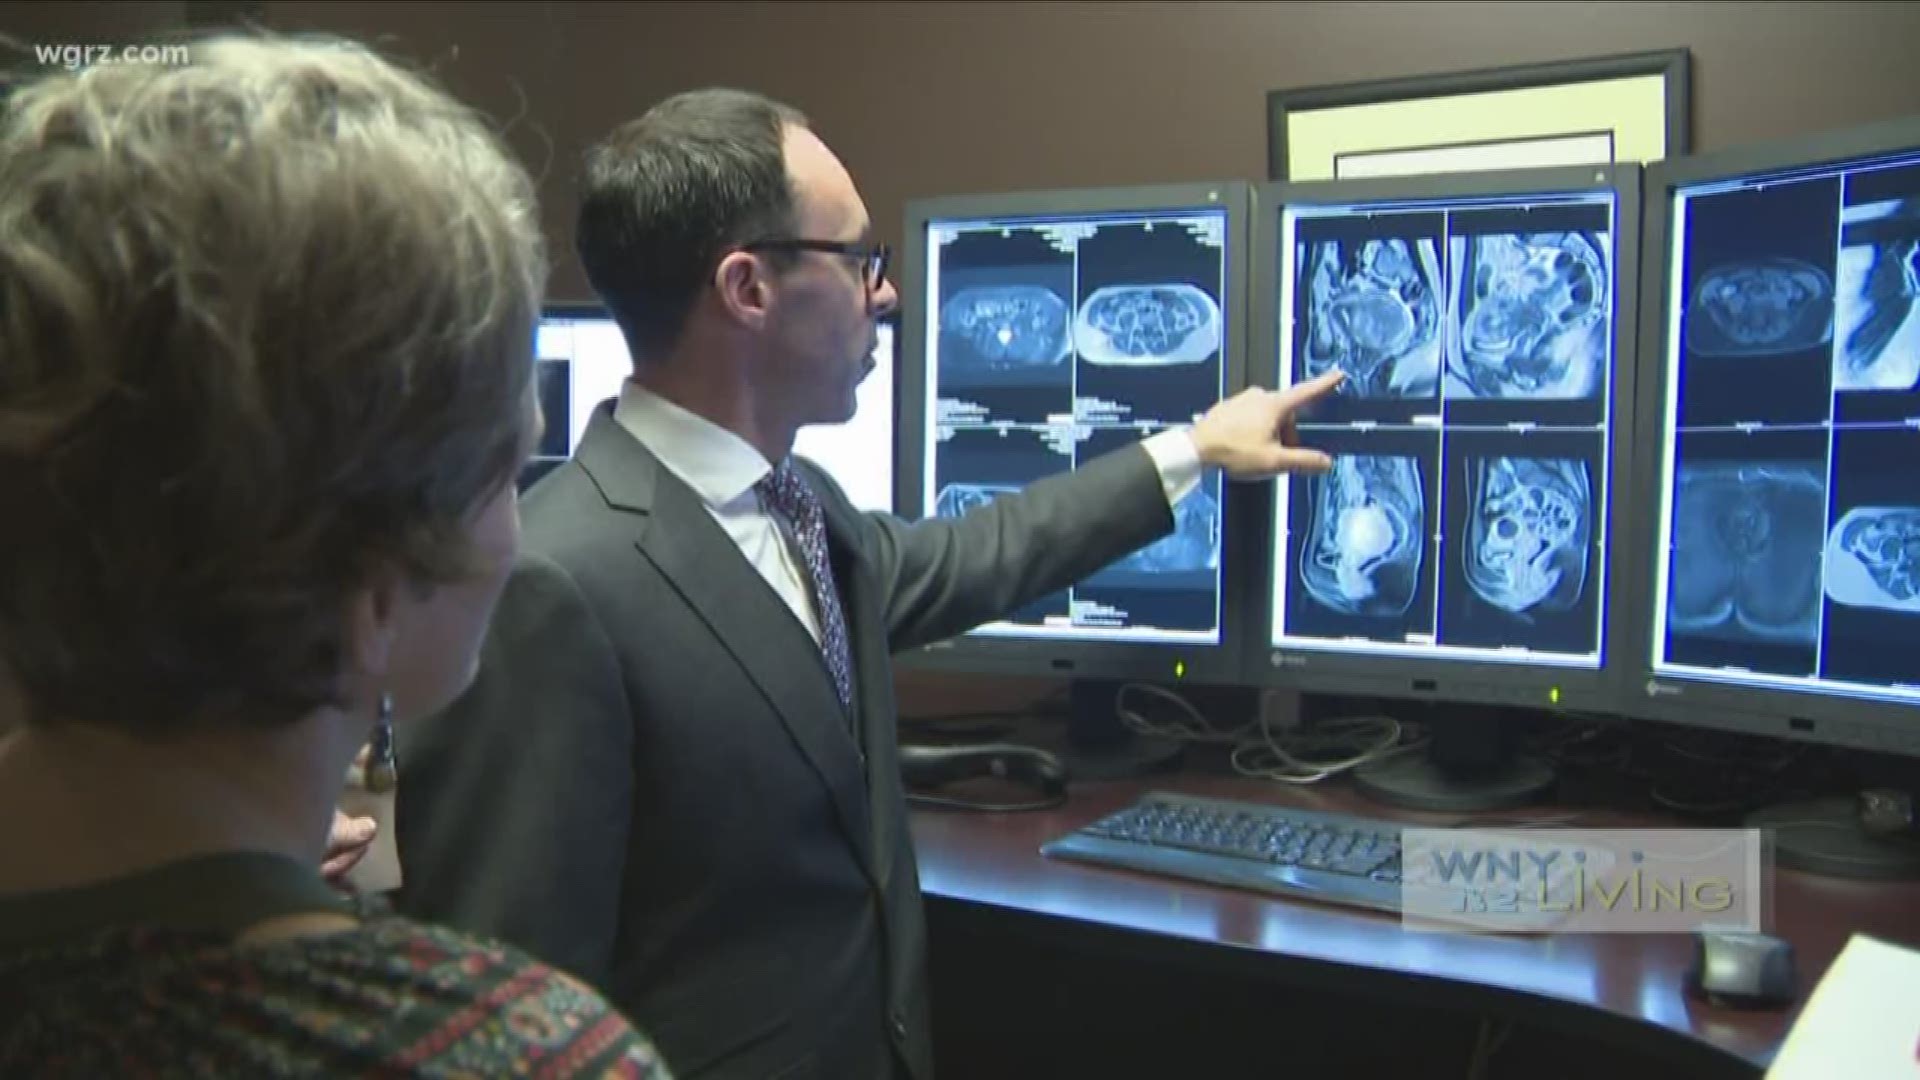 January 18 - Windsong Radiology (THIS VIDEO IS SPONSORED BY WINDSONG RADIOLOGY)